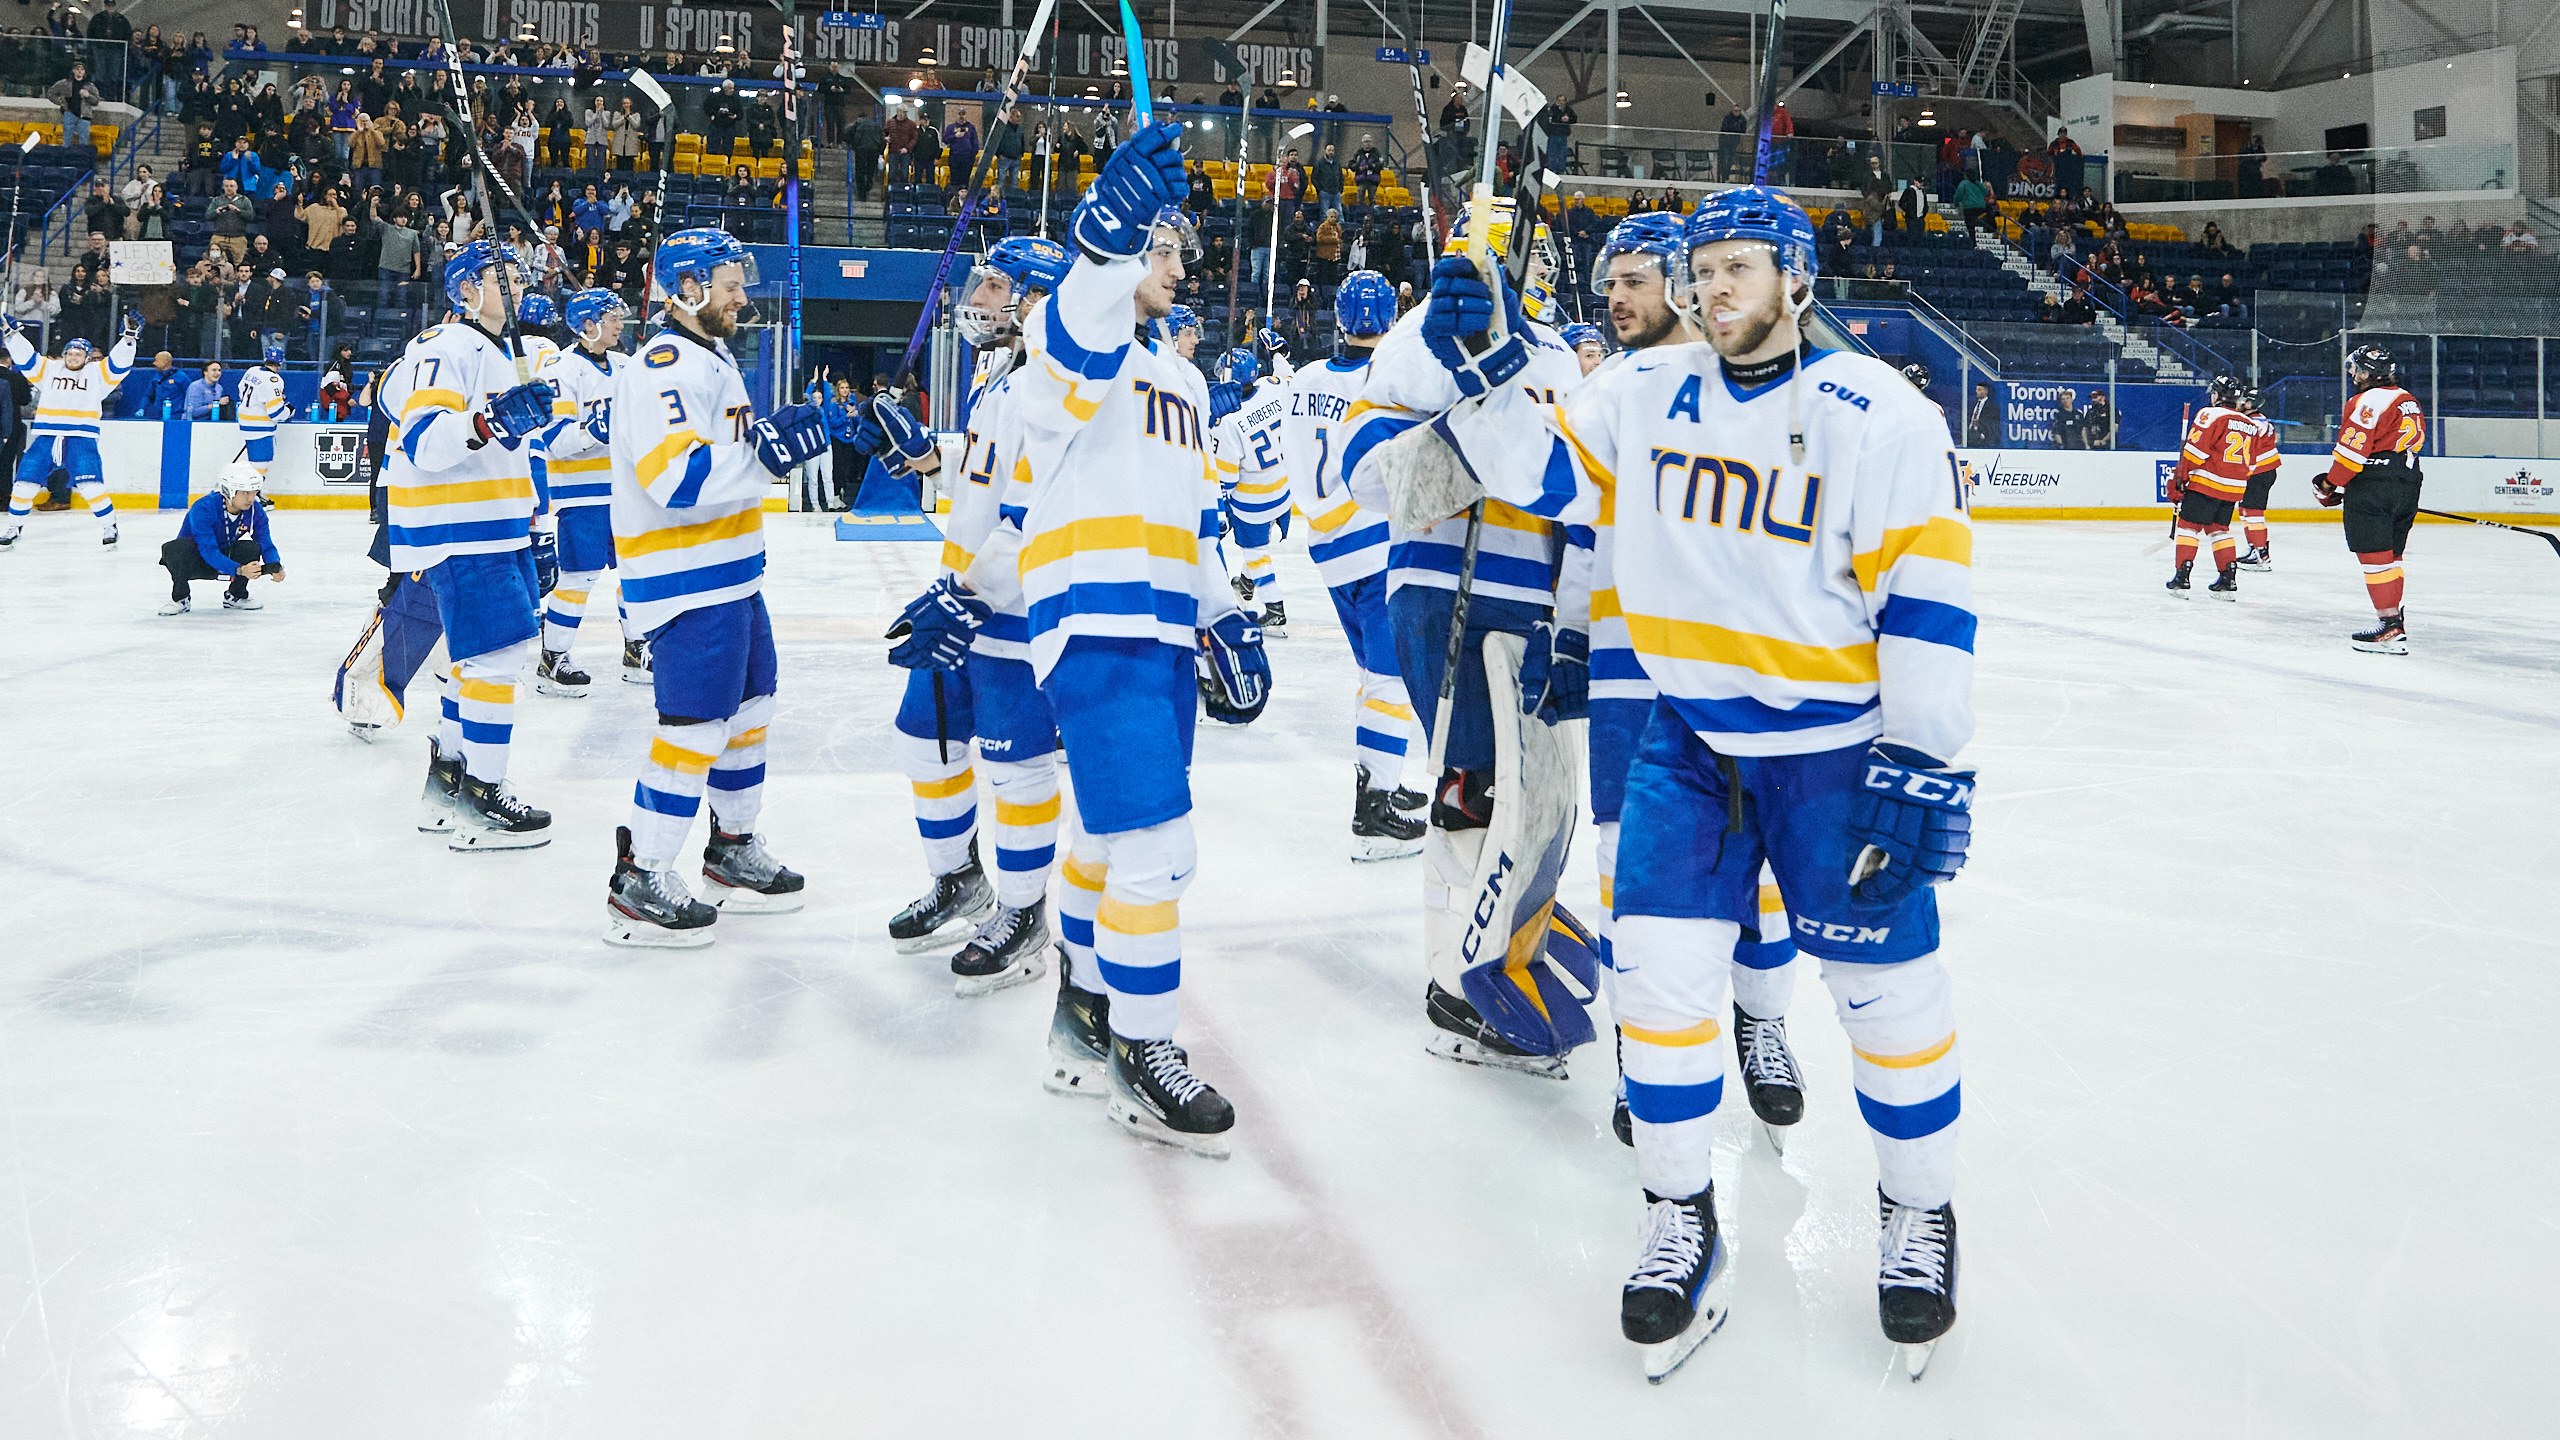 TMU Bold hockey players raise their sticks in celebration on the ice after their win